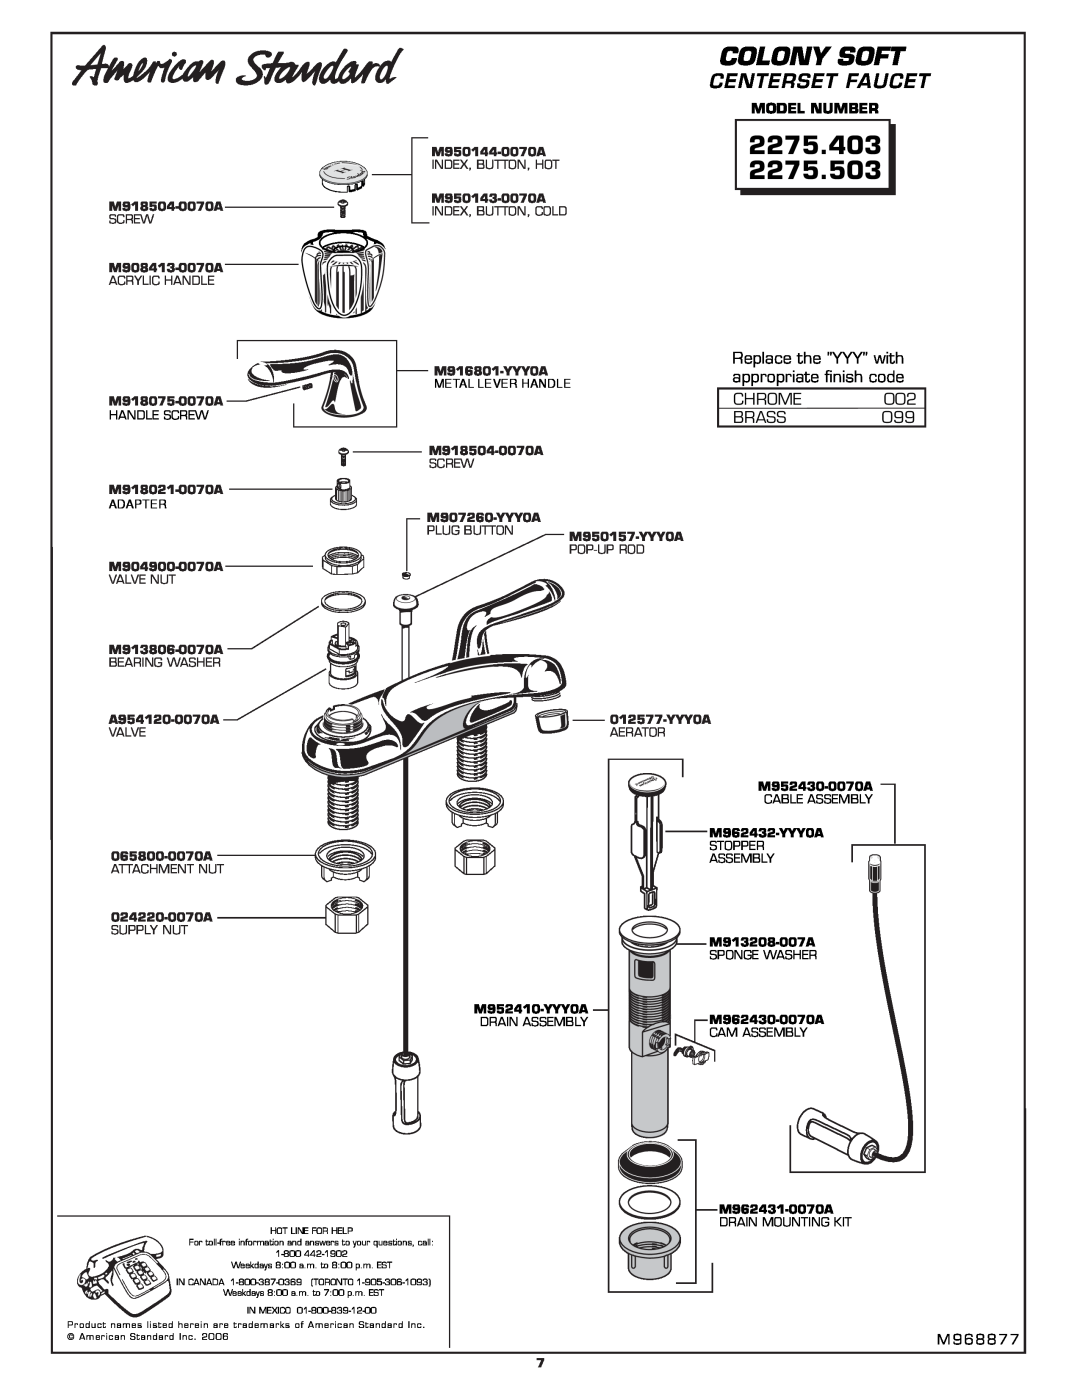 American Standard M968877 manual Colony Soft, 2275.403, Centerset Faucet, Replace the YYY with, Chrome, Brass, M 9 6 8 